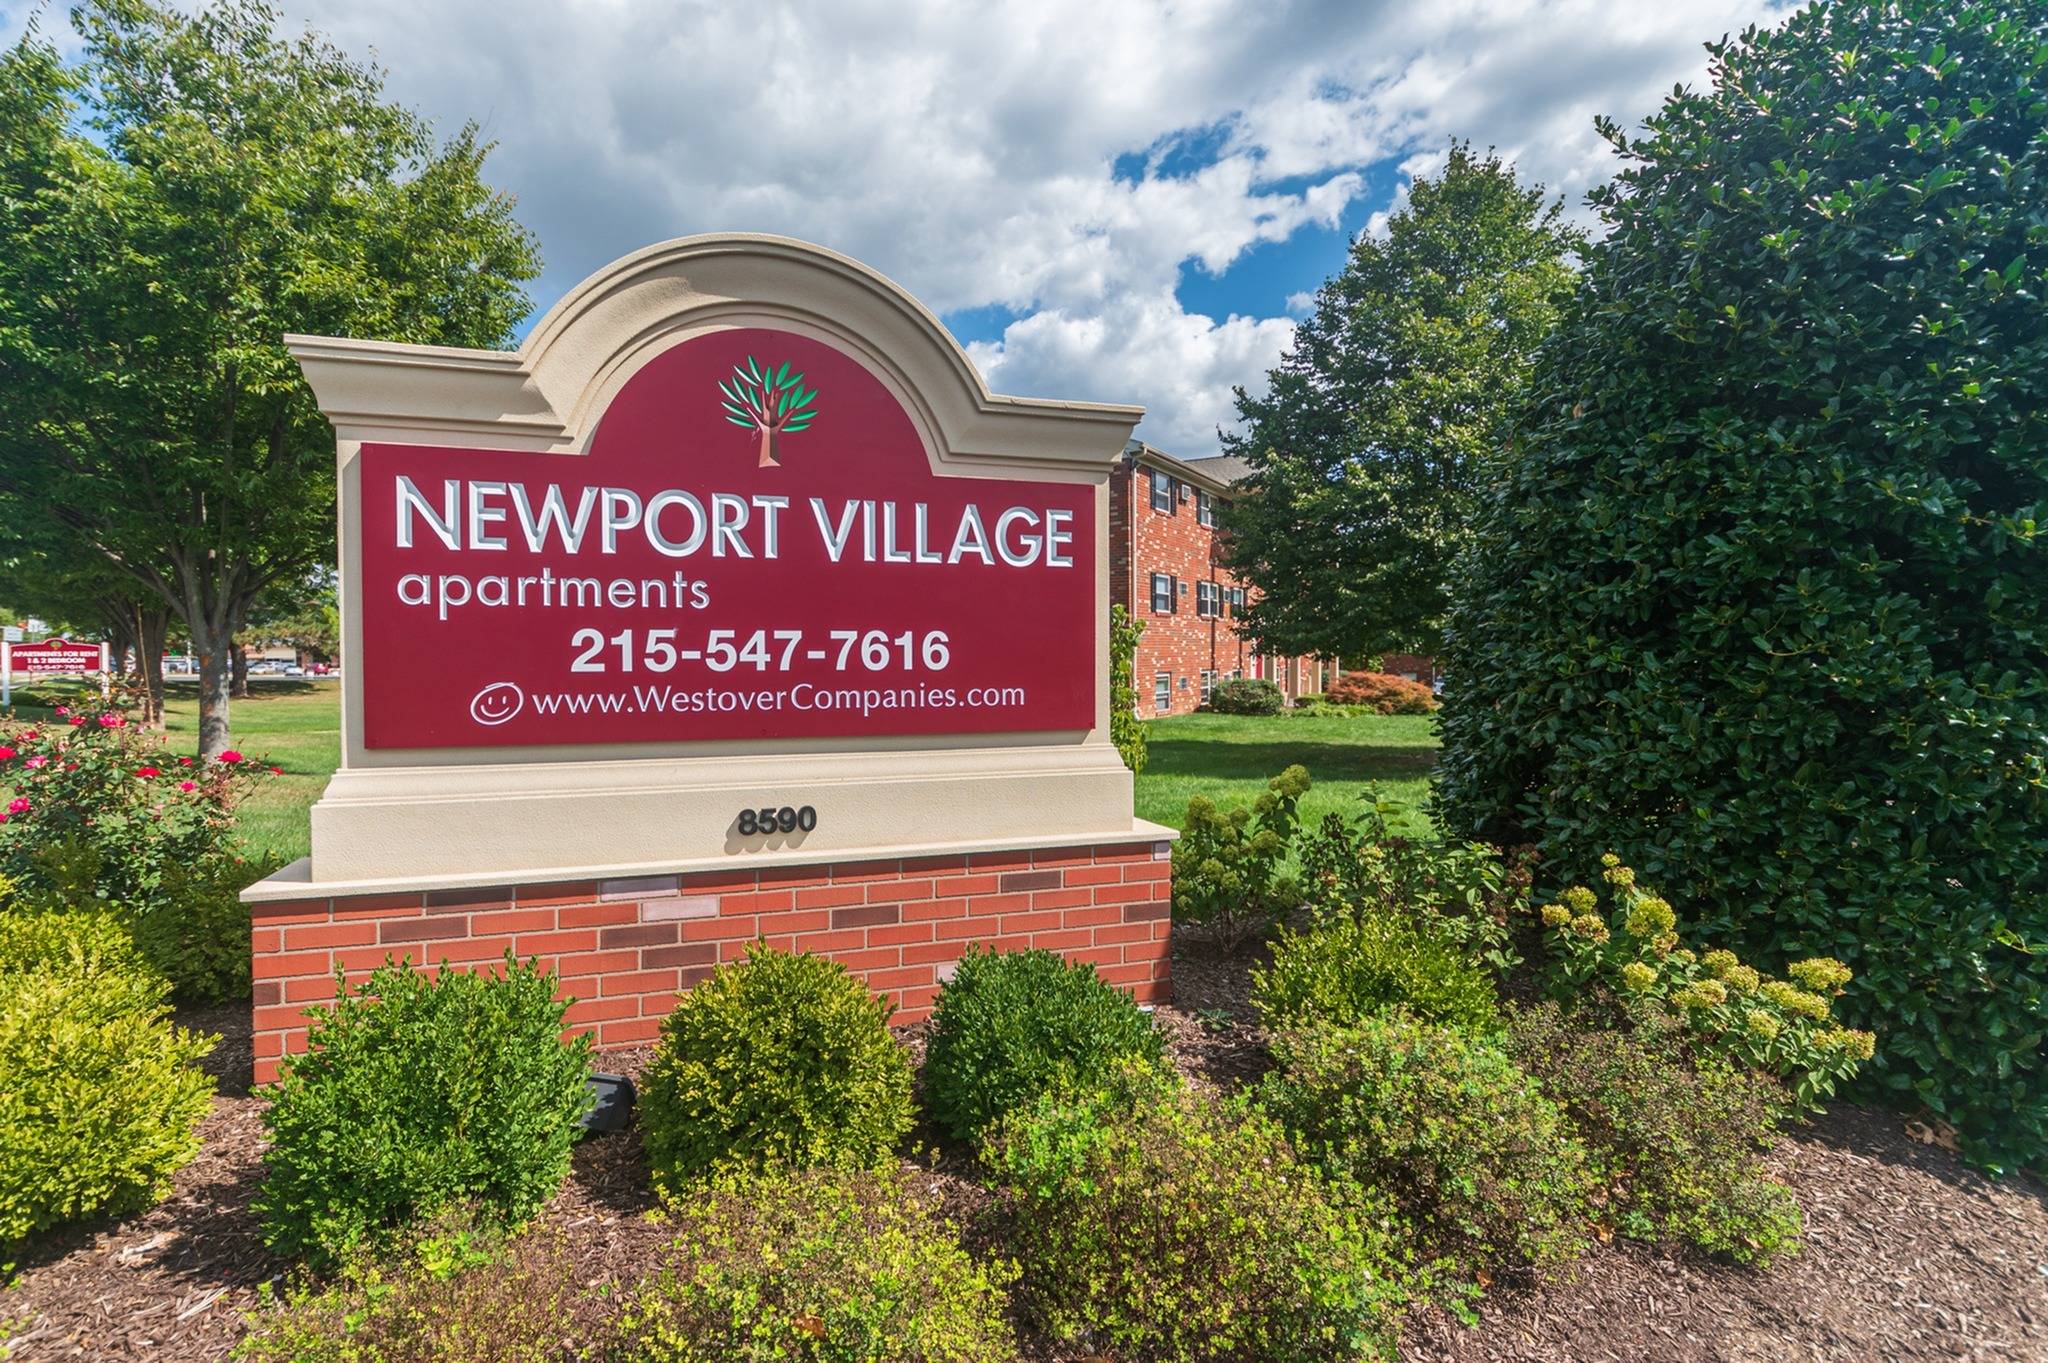 Newport Village Apartments sign with several shrubs in front of it.